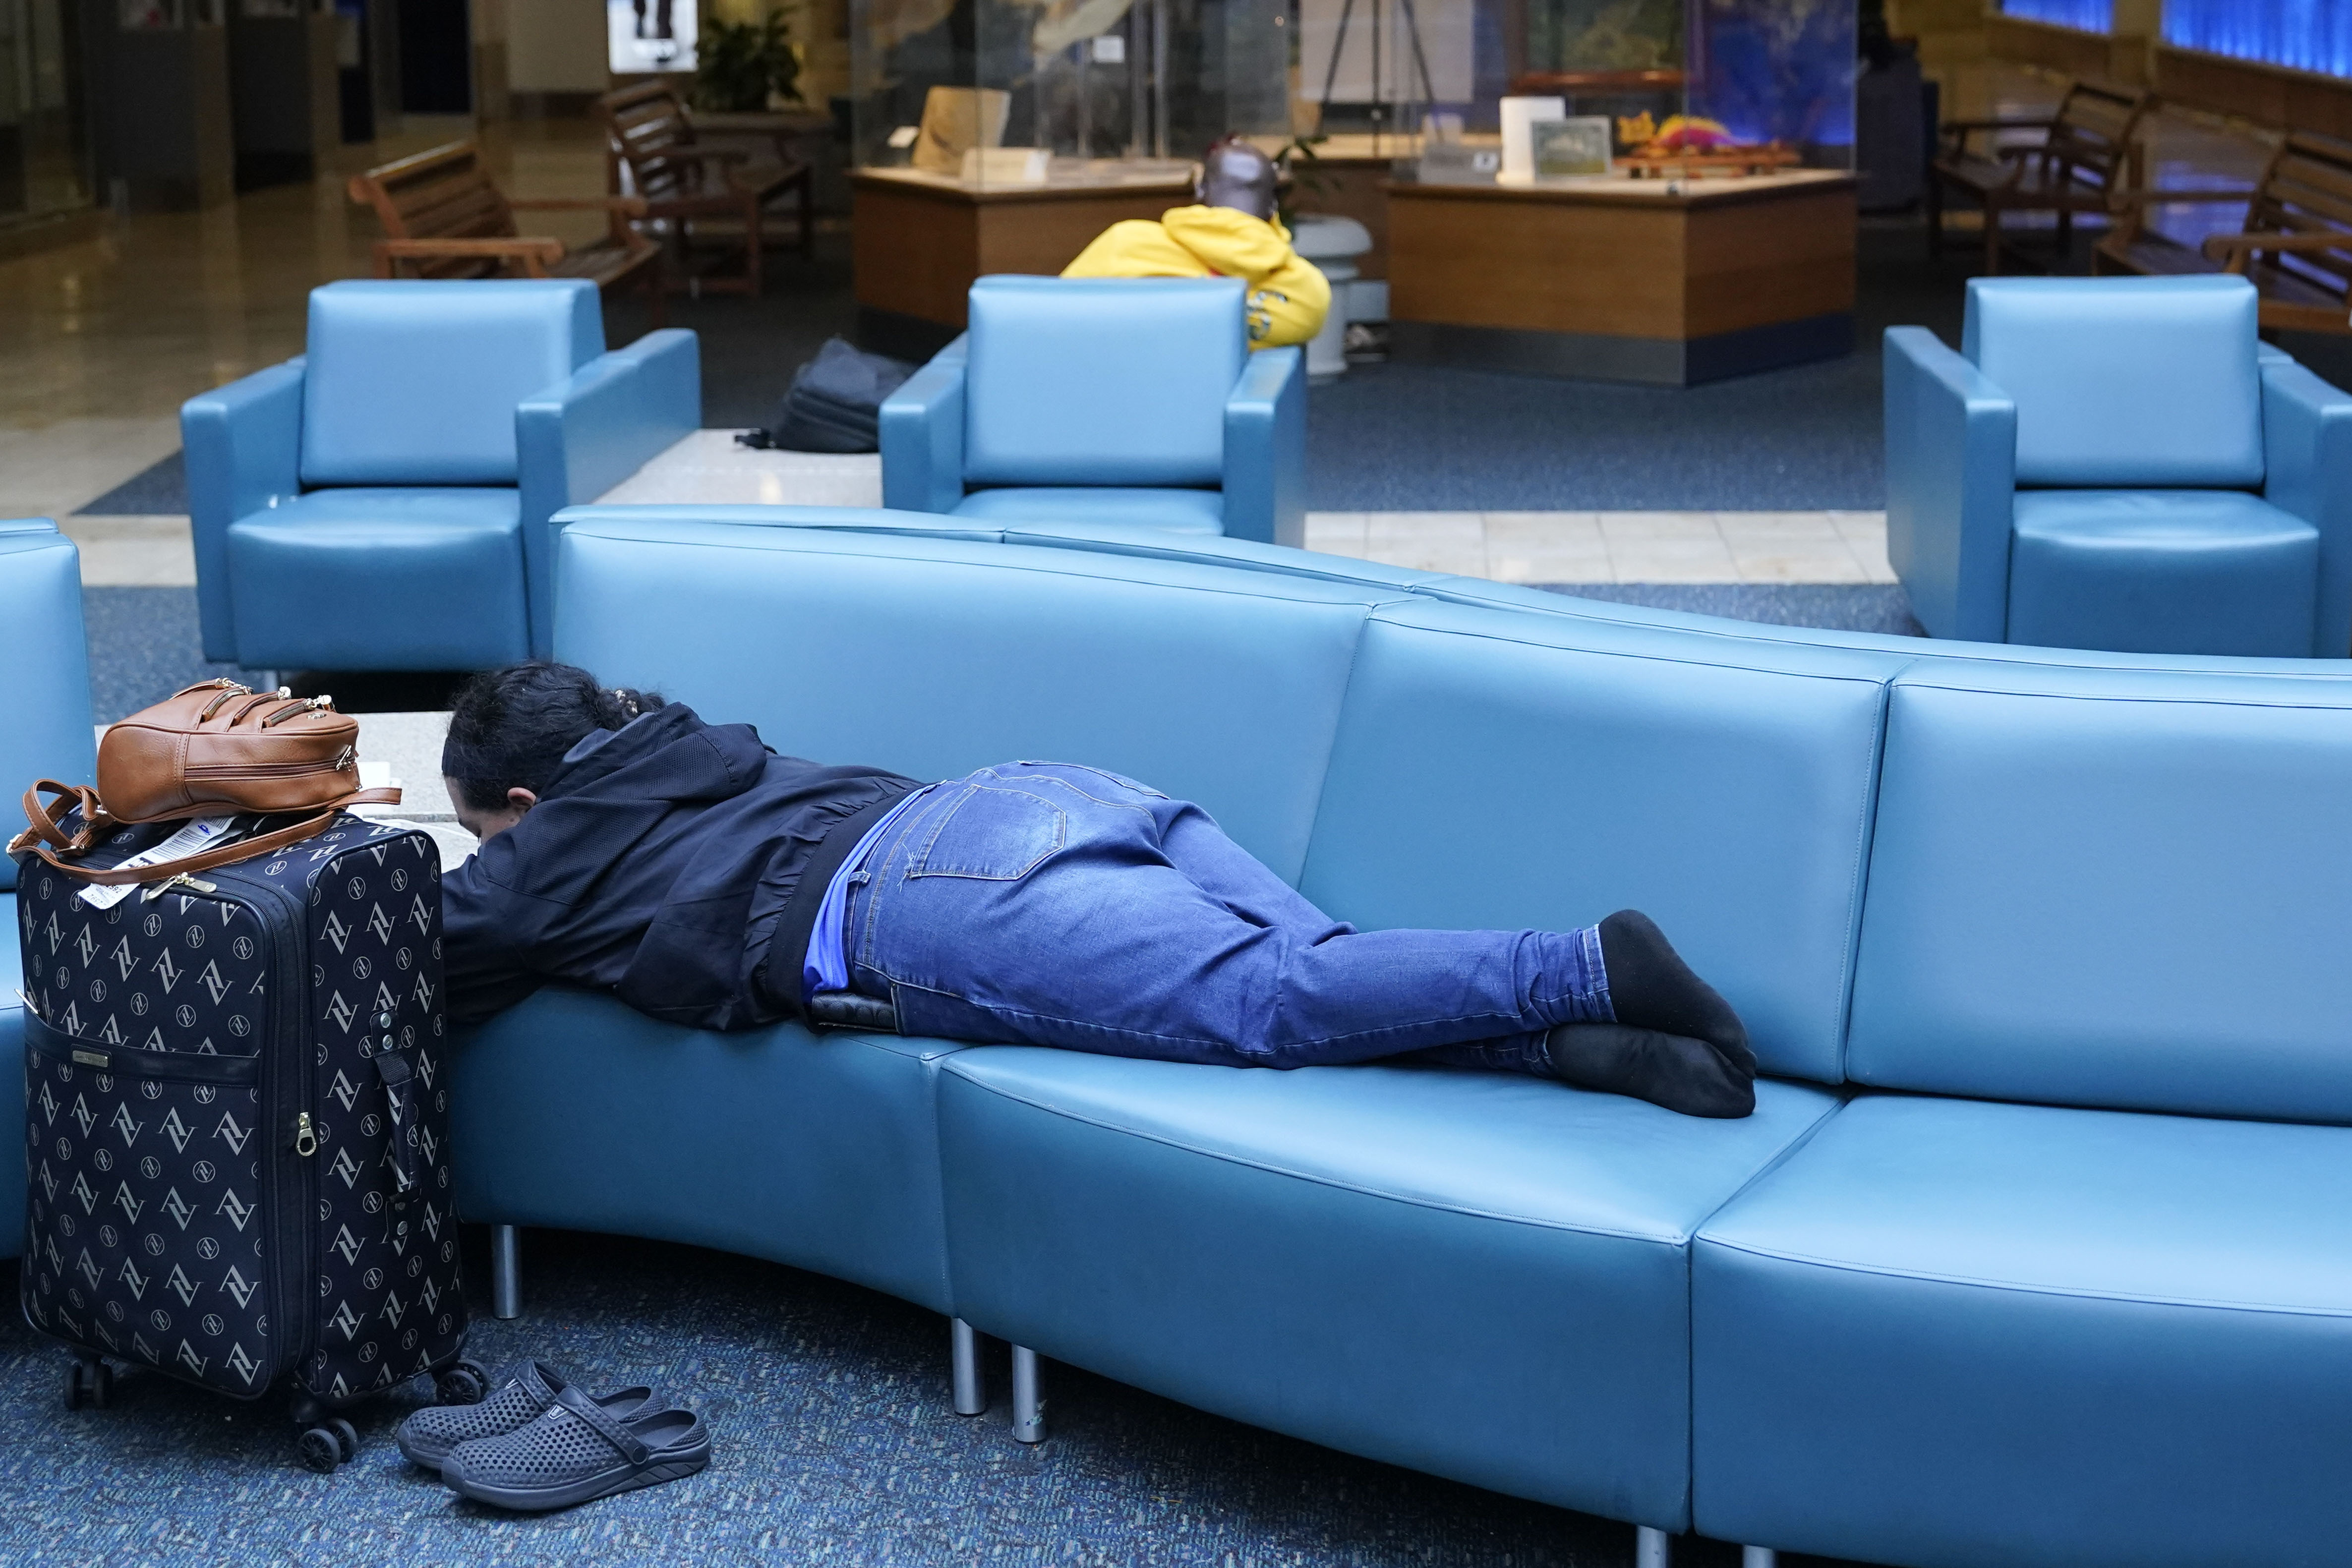 A traveller rests on a couch at the Orlando Airport prior to the facility being closed ahead of Hurricane Ian